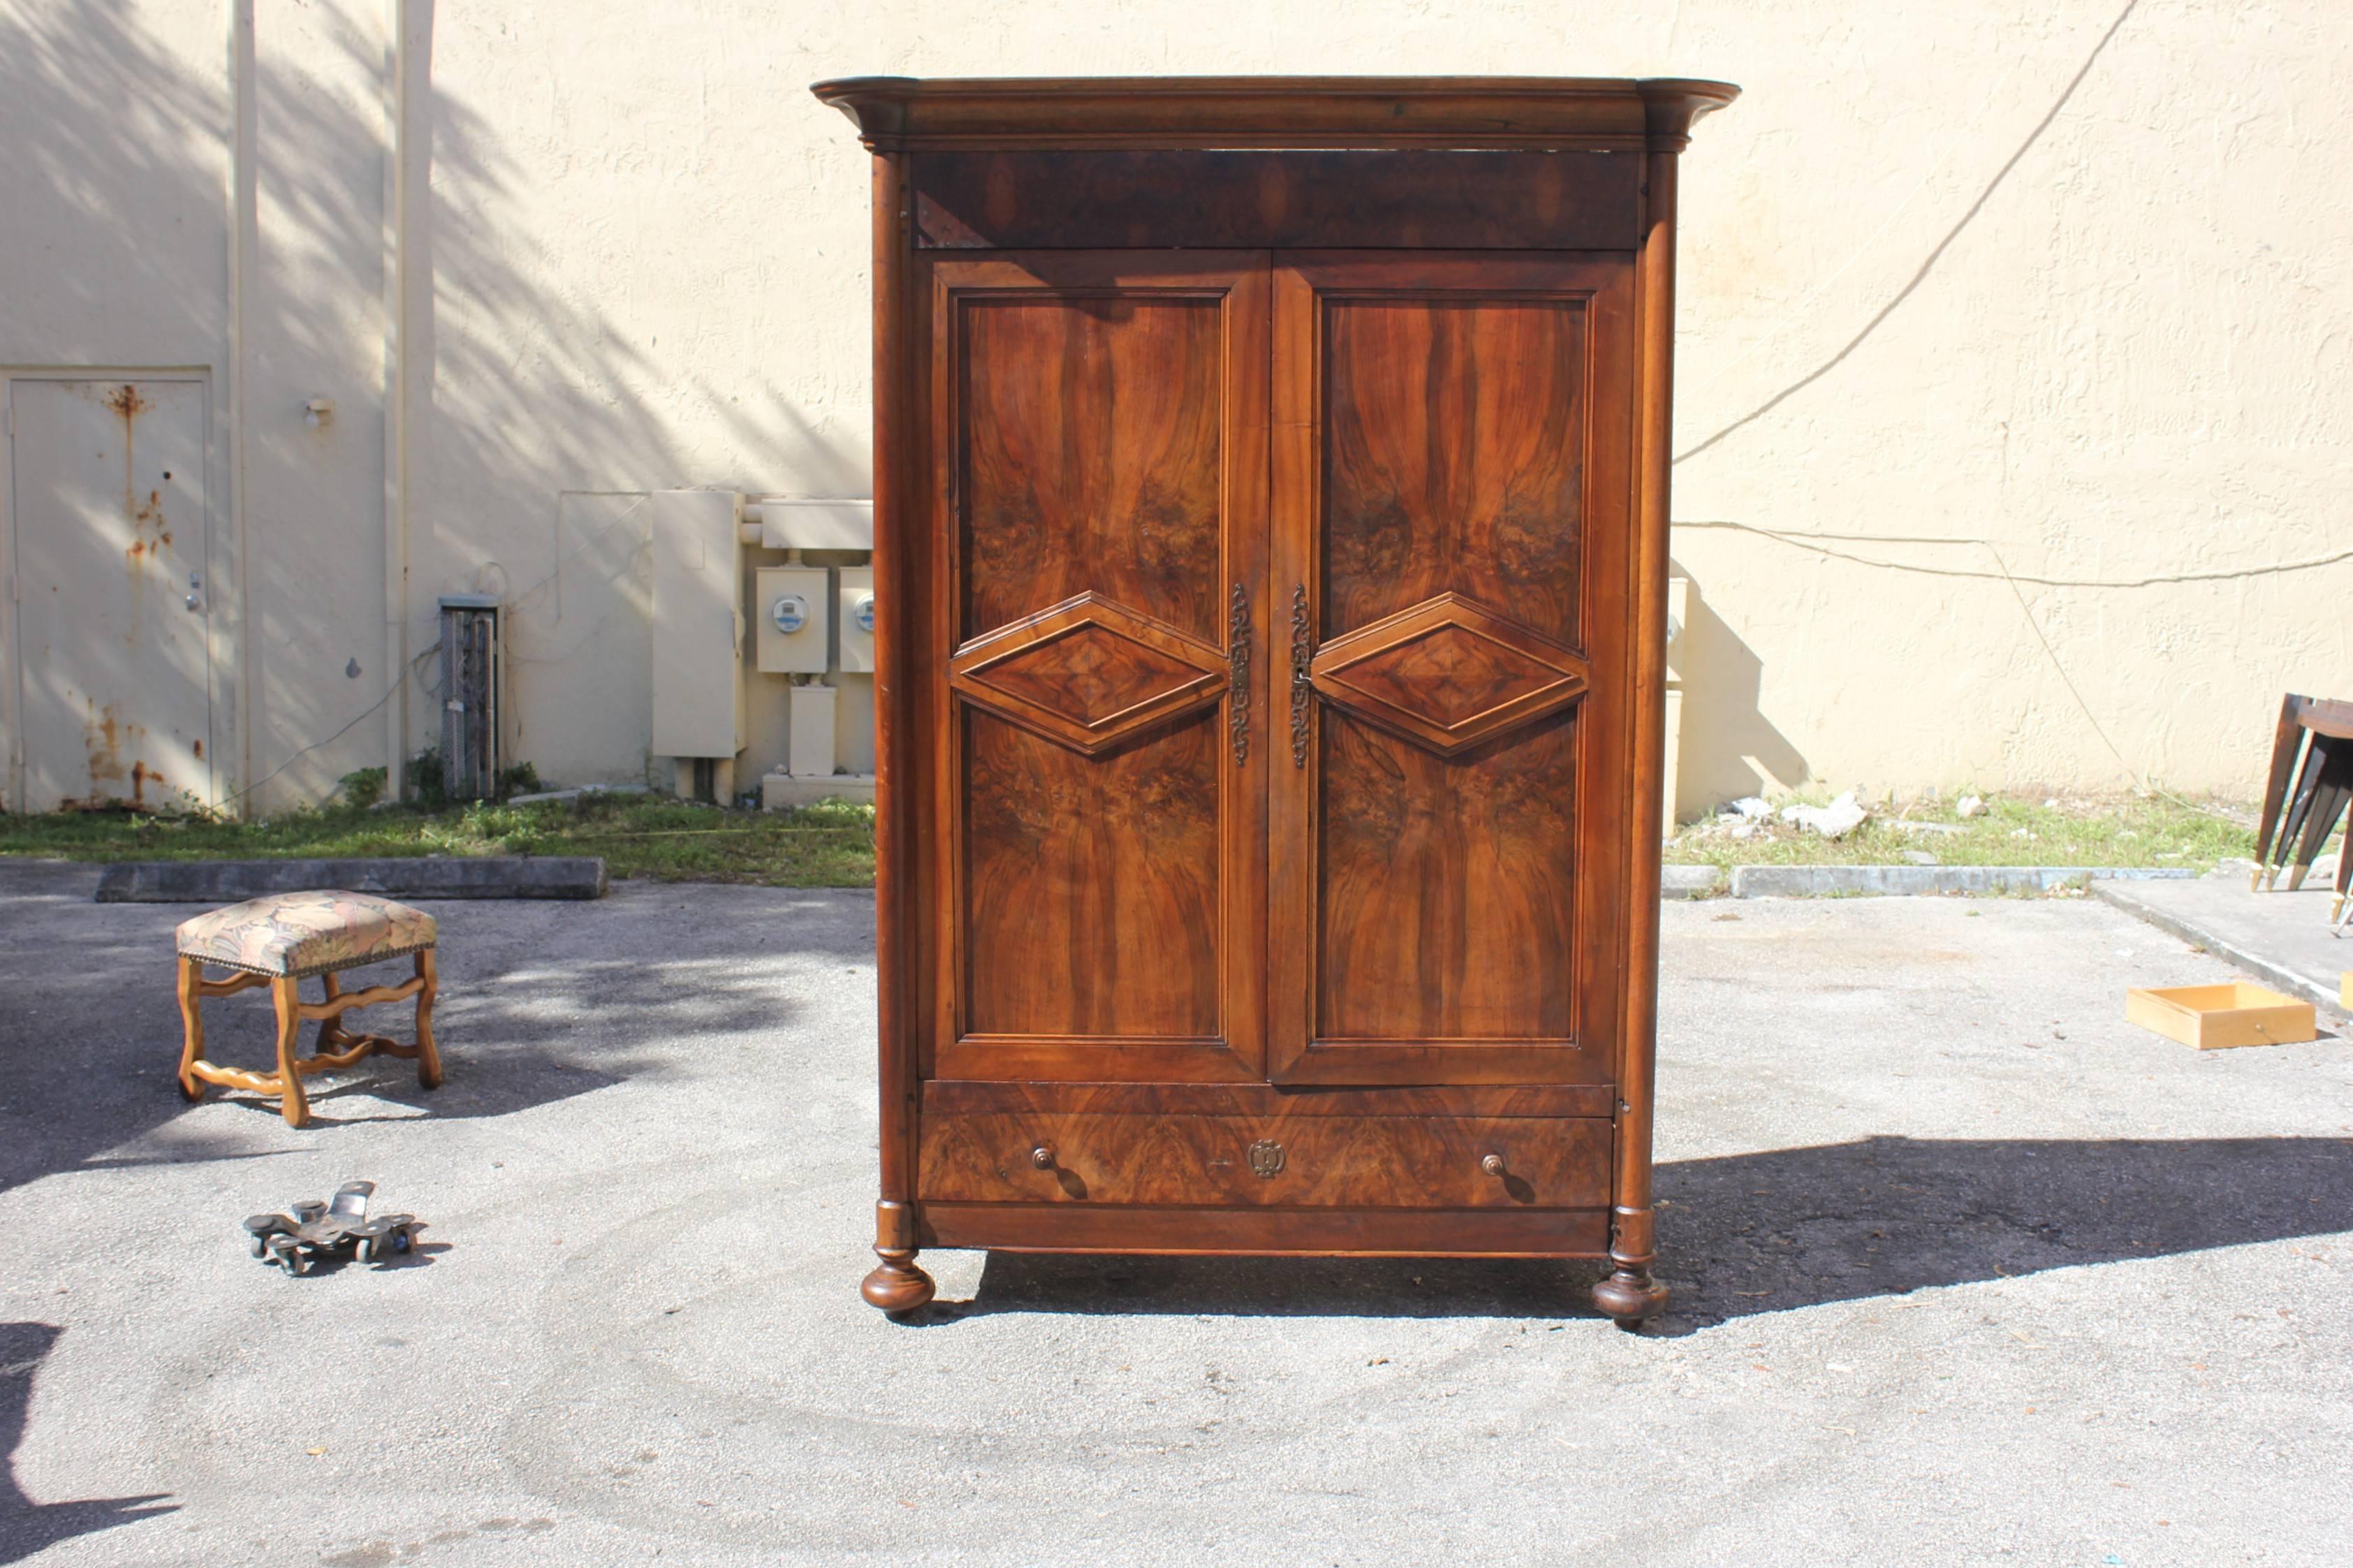 19th century French Louis Philippe walnut armoire represents the essence of purity of architecture, a design type that exemplifies the period! This example, rendered from fine French walnut, features the Classic lines that have made the style